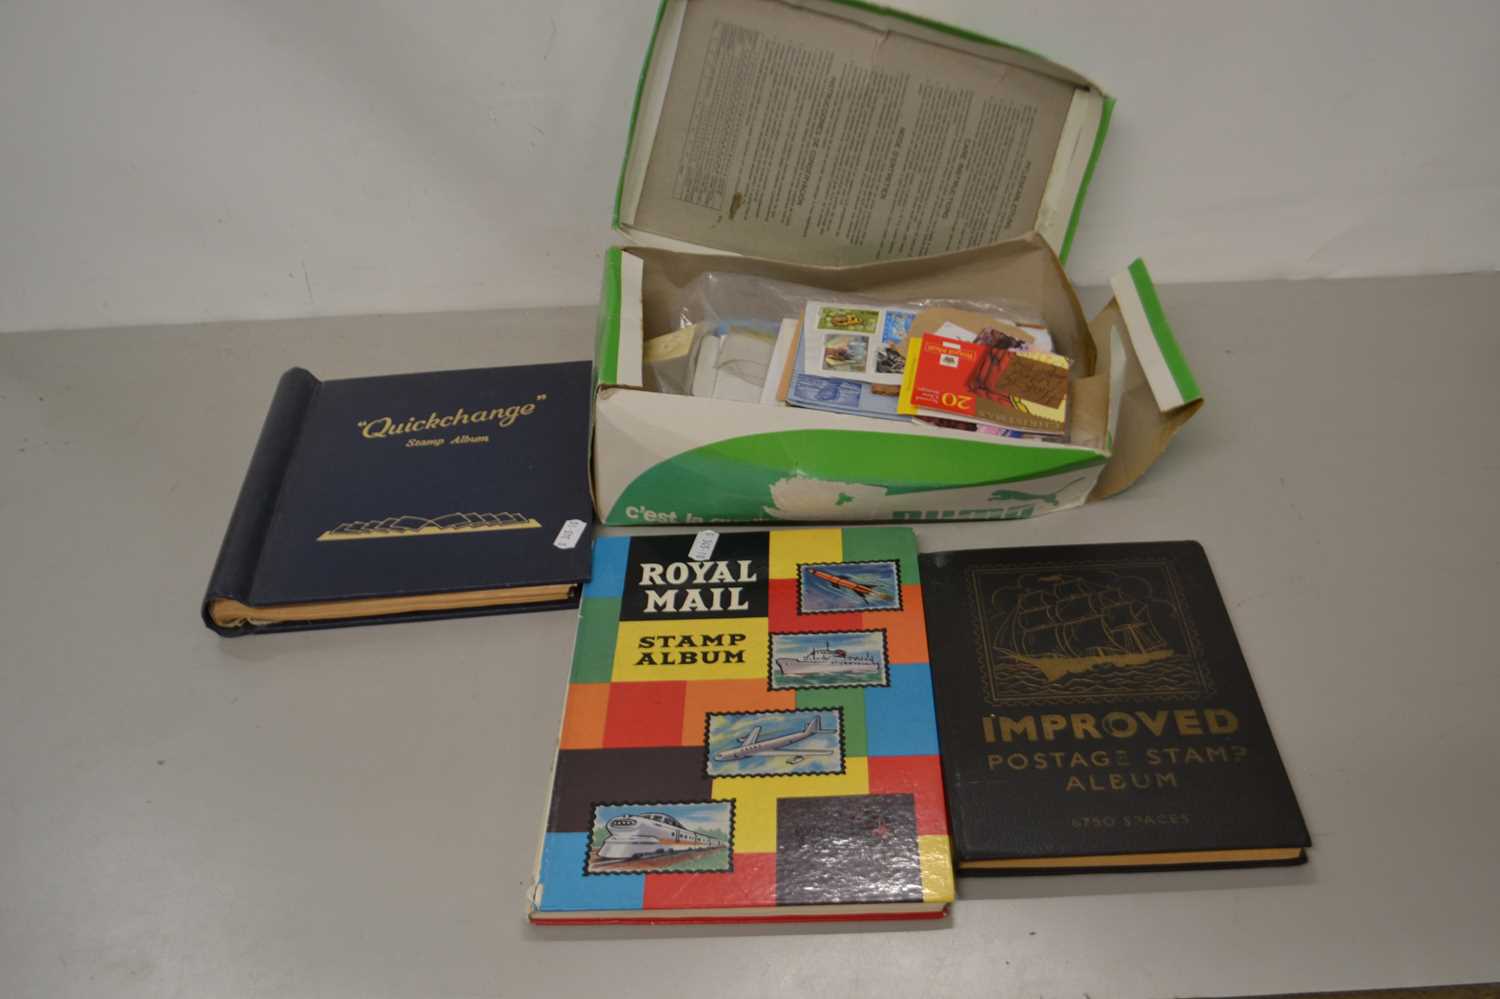 Mixed Lot: Three various junior stamp albums plus a box of various loose stamps